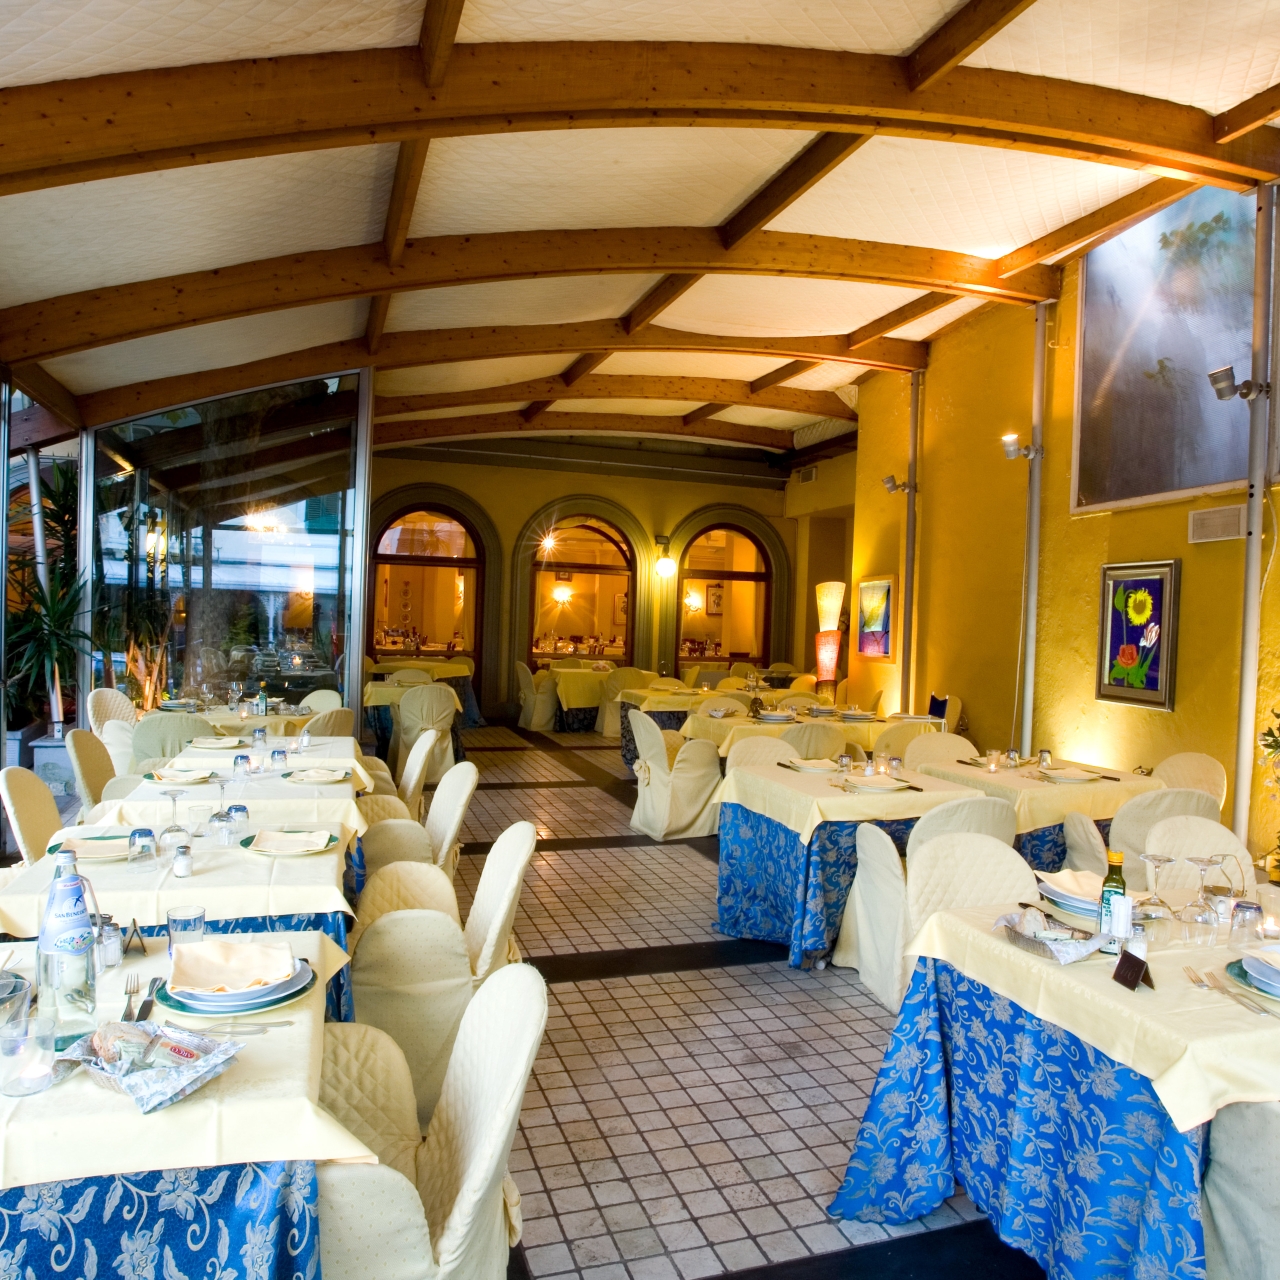 Golf Hotel Corallo - 3 HRS star hotel in Montecatini Terme (Tuscany)